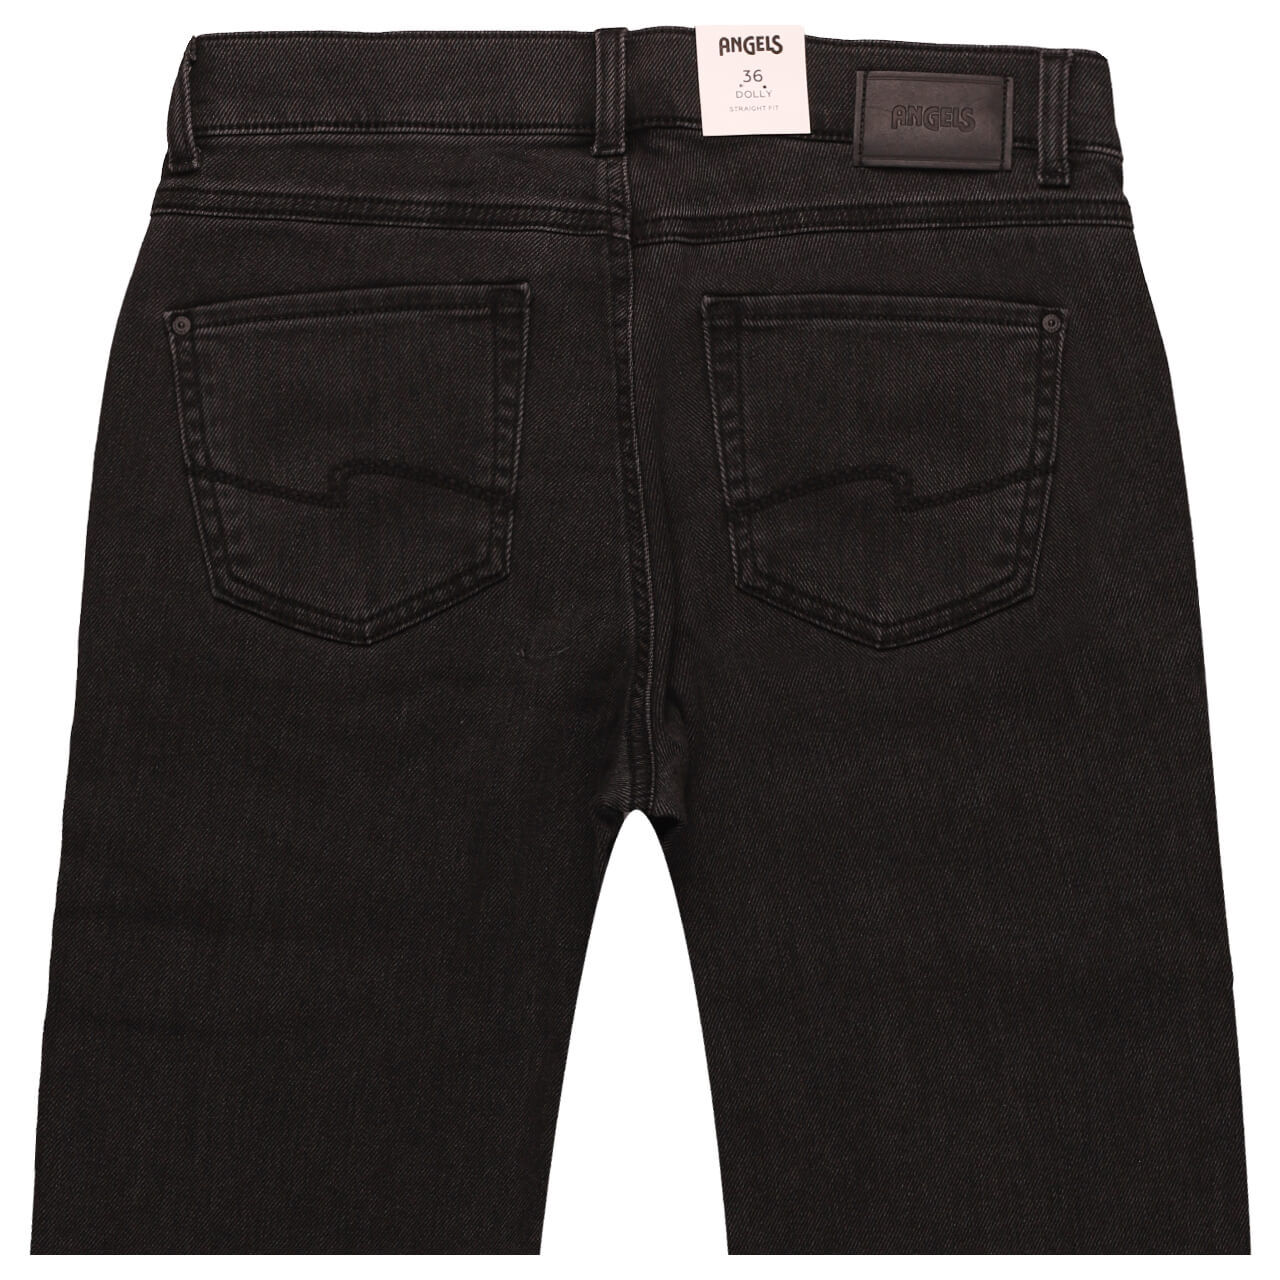 Angels Dolly Jeans anthracite thermo denim